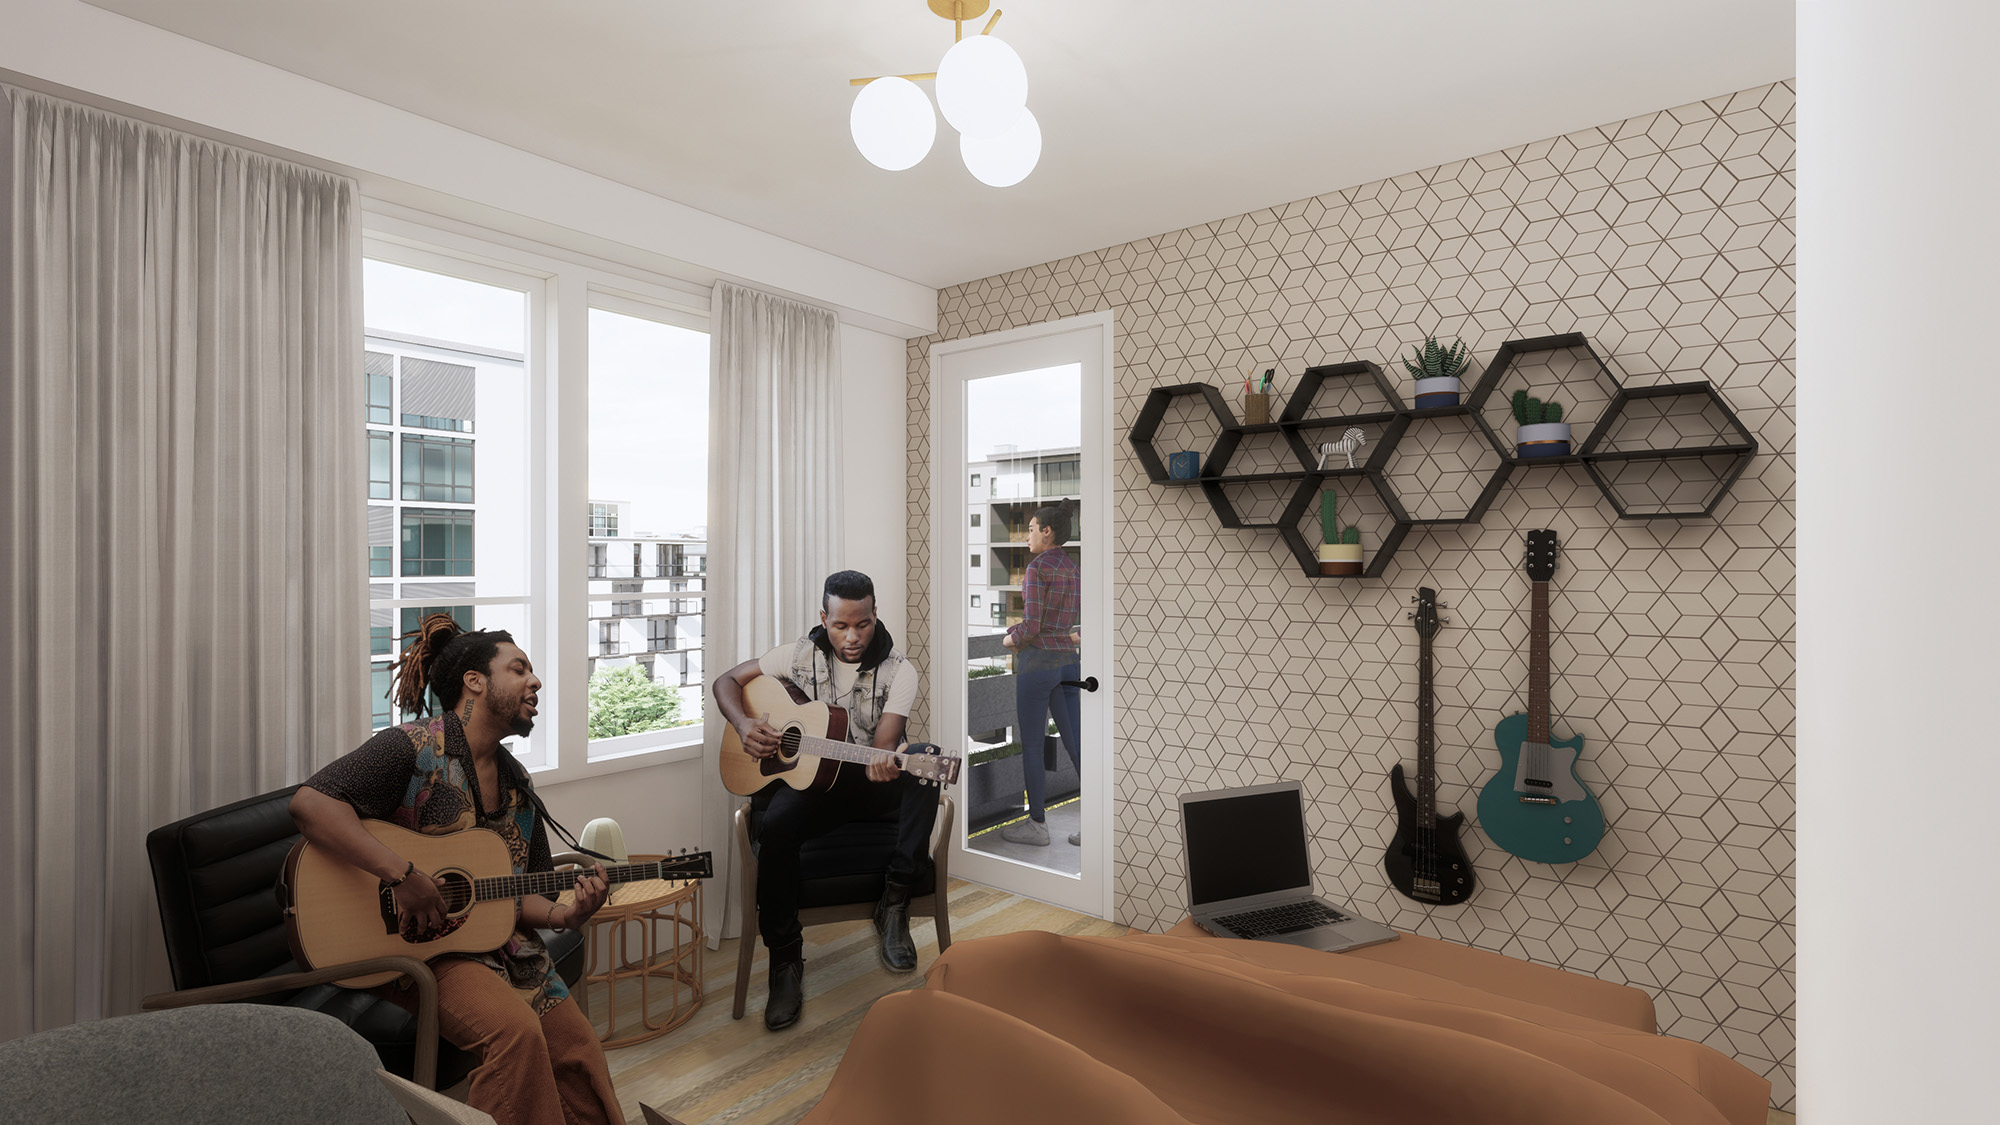 Two people playing guitar in multifamily residence